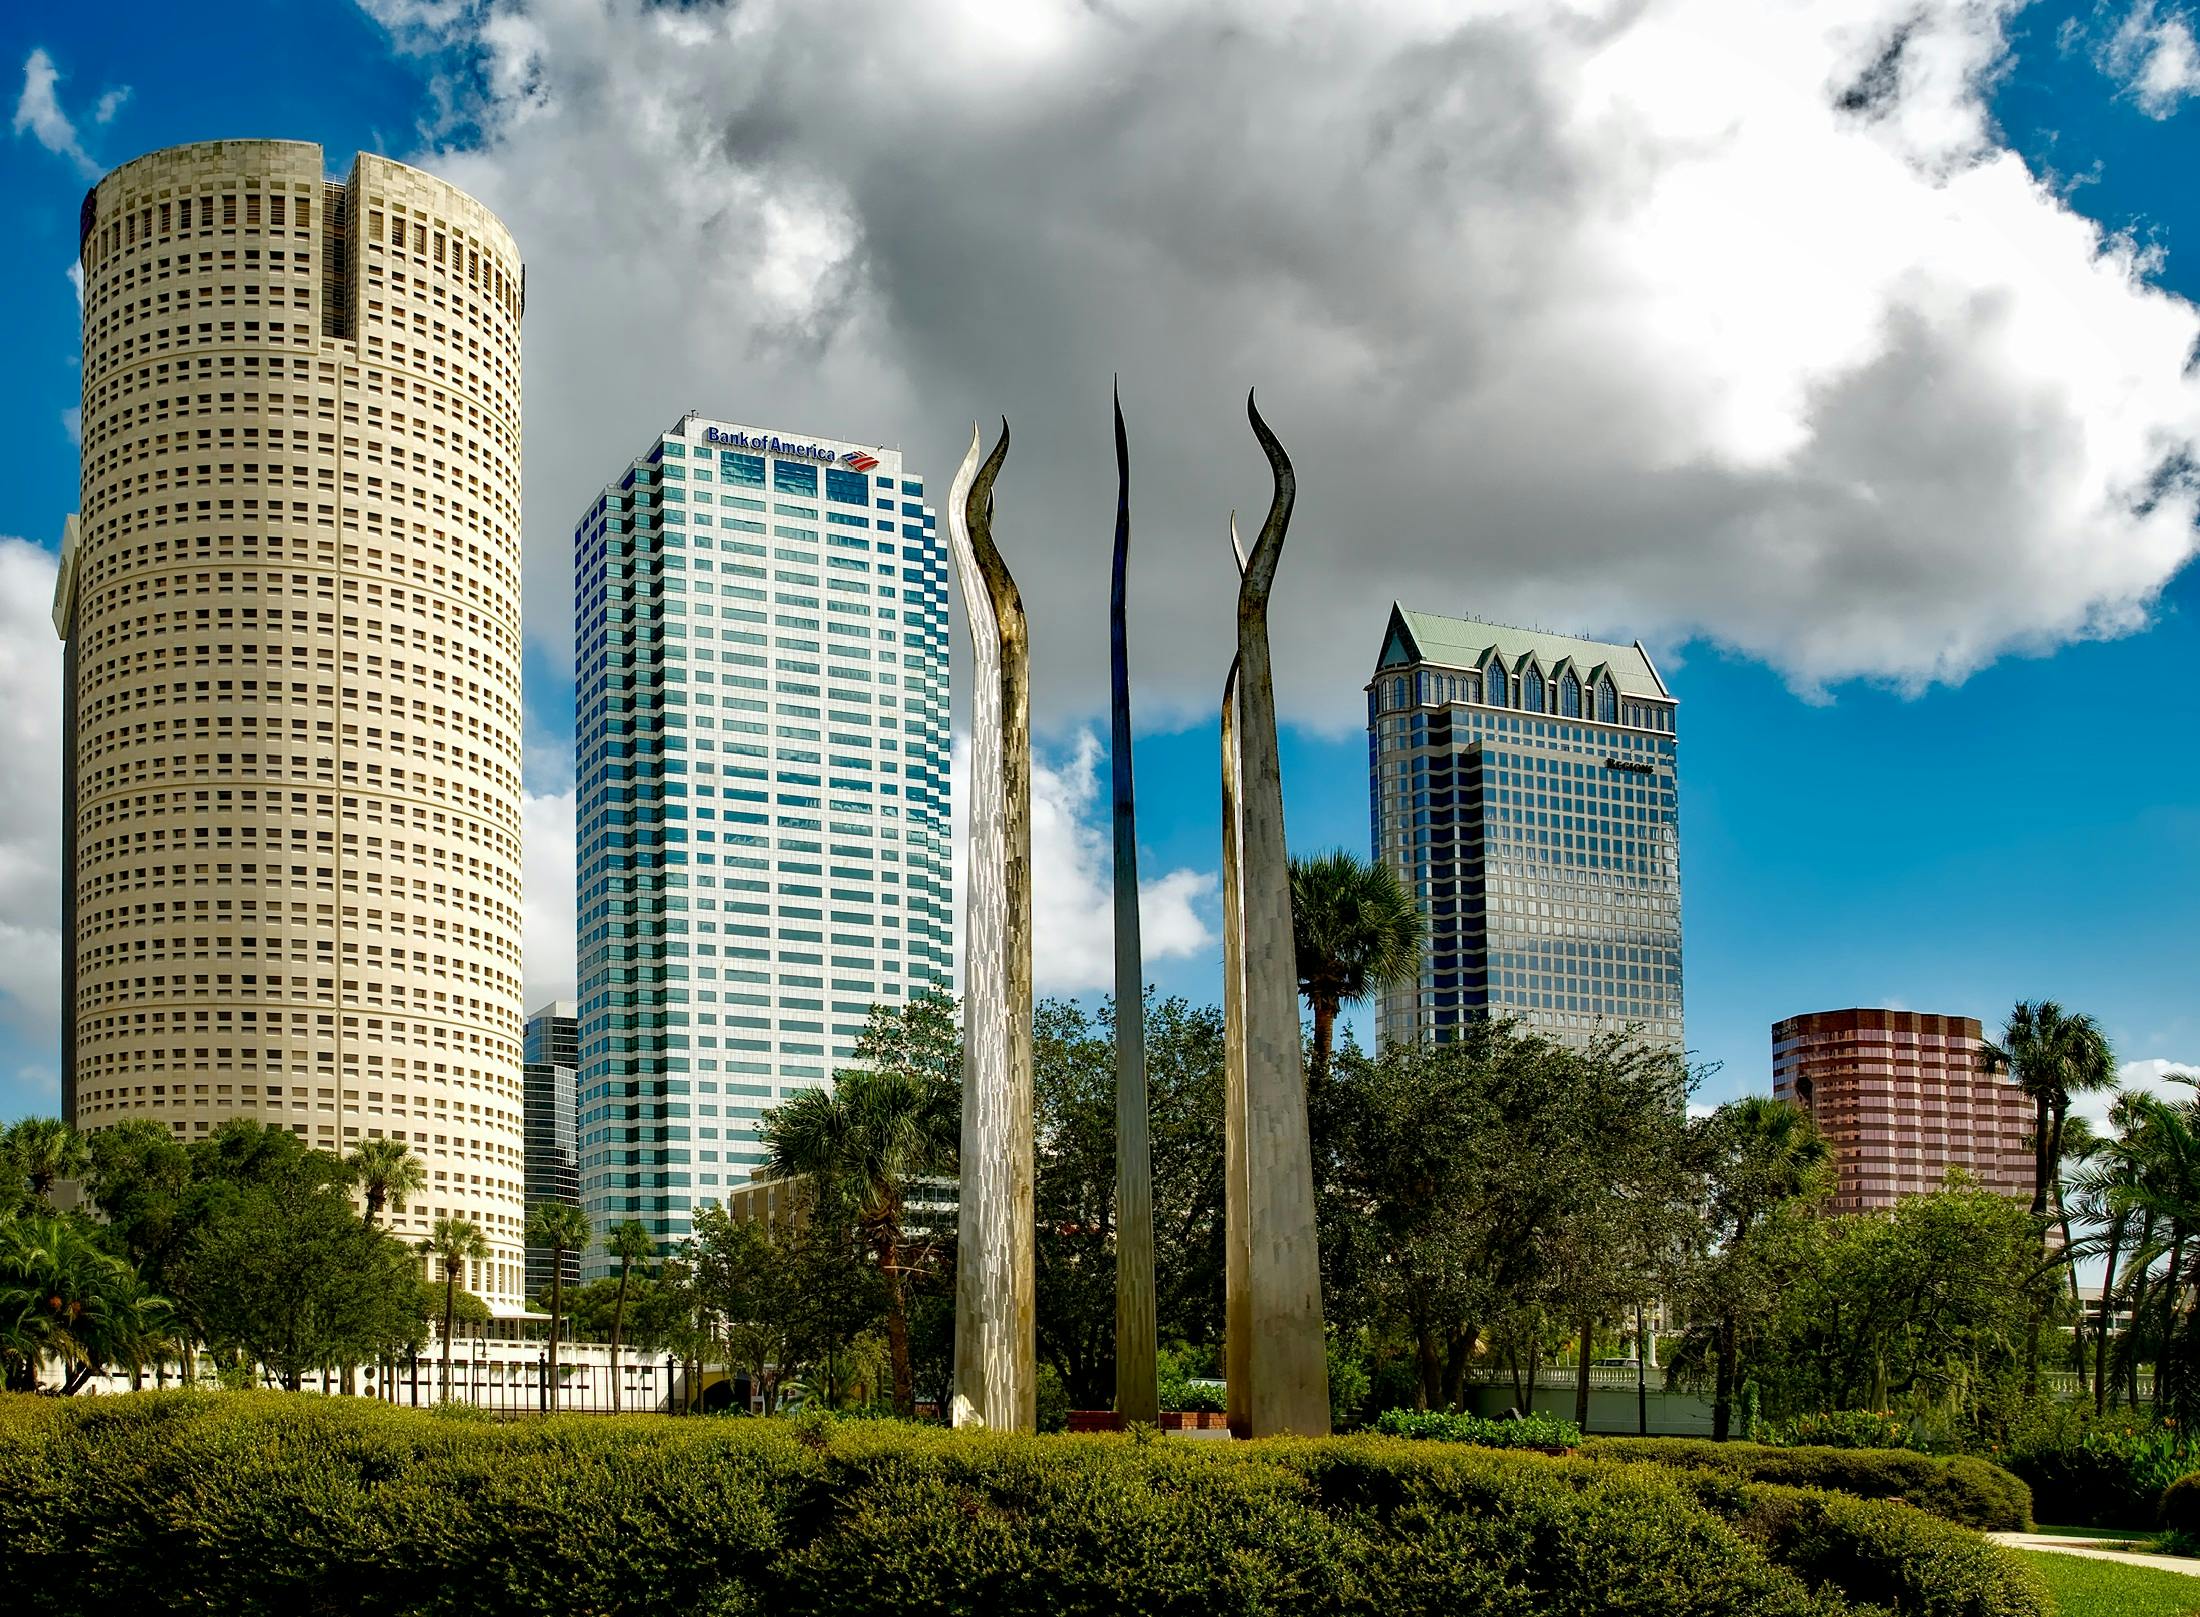 A Sunshine City Adventure: 5 Best Things to Do in Tampa